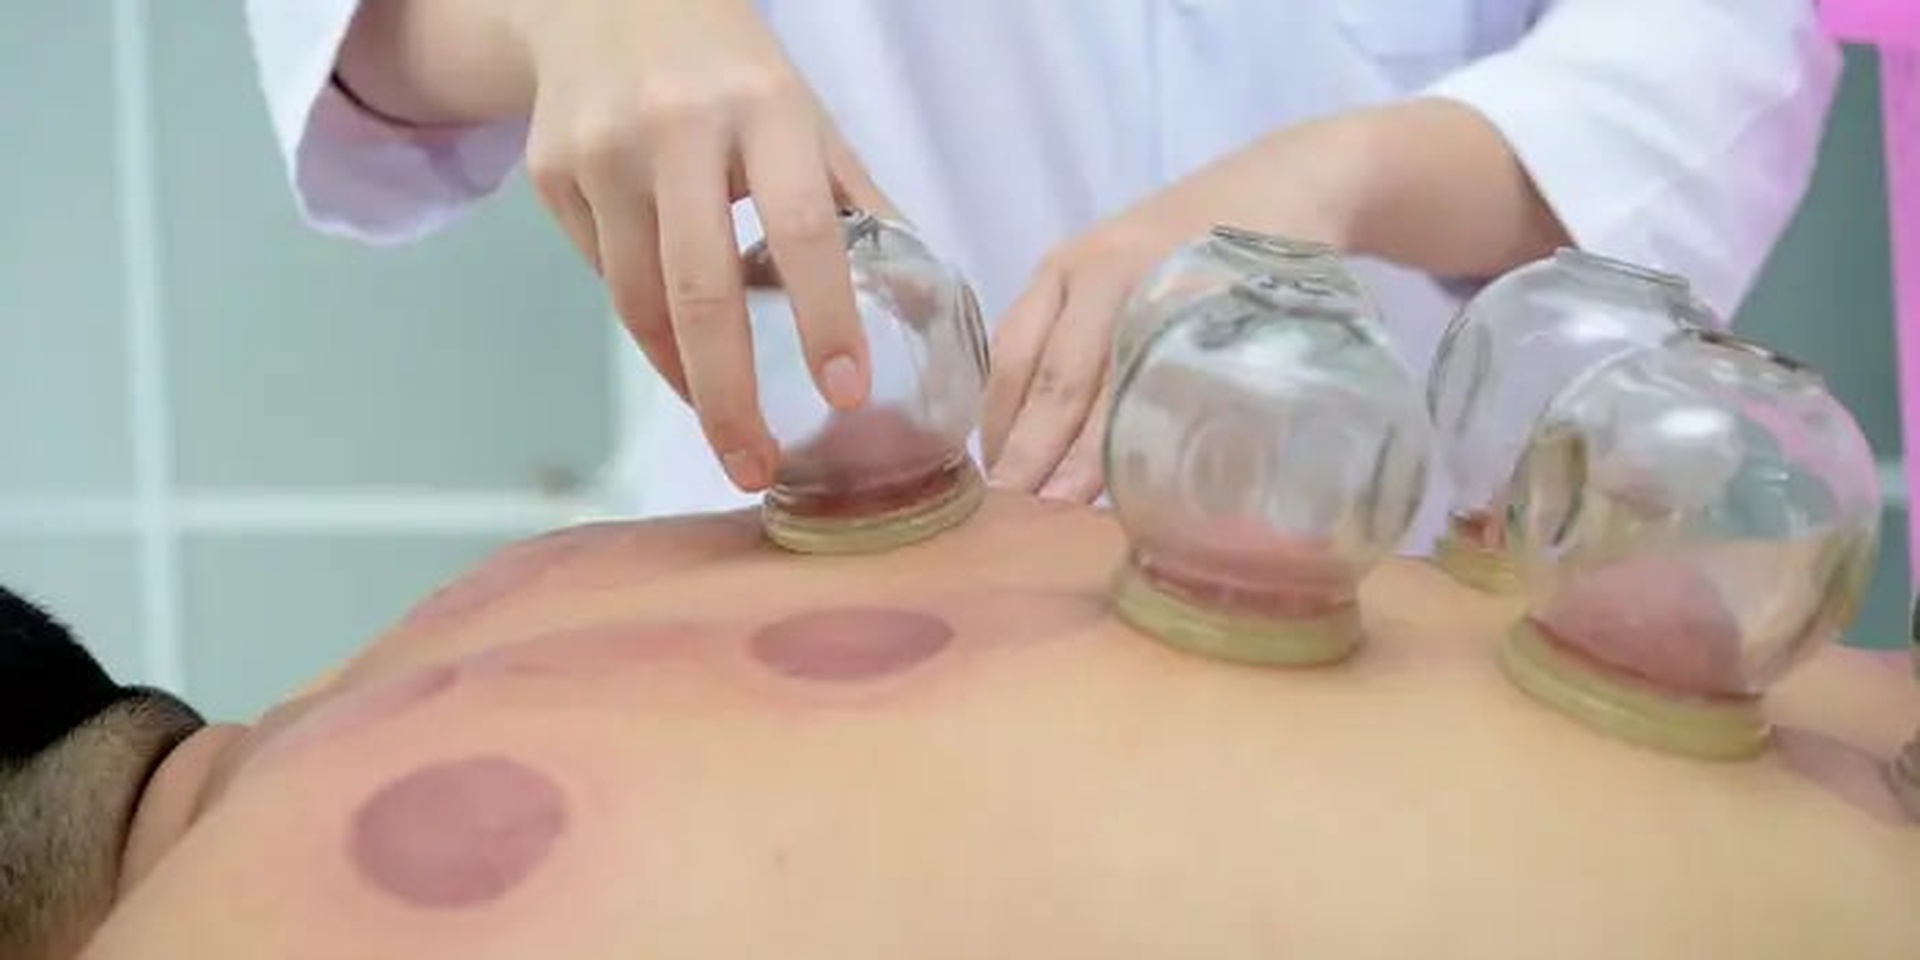 cupping therapy techniques explains how to benefits